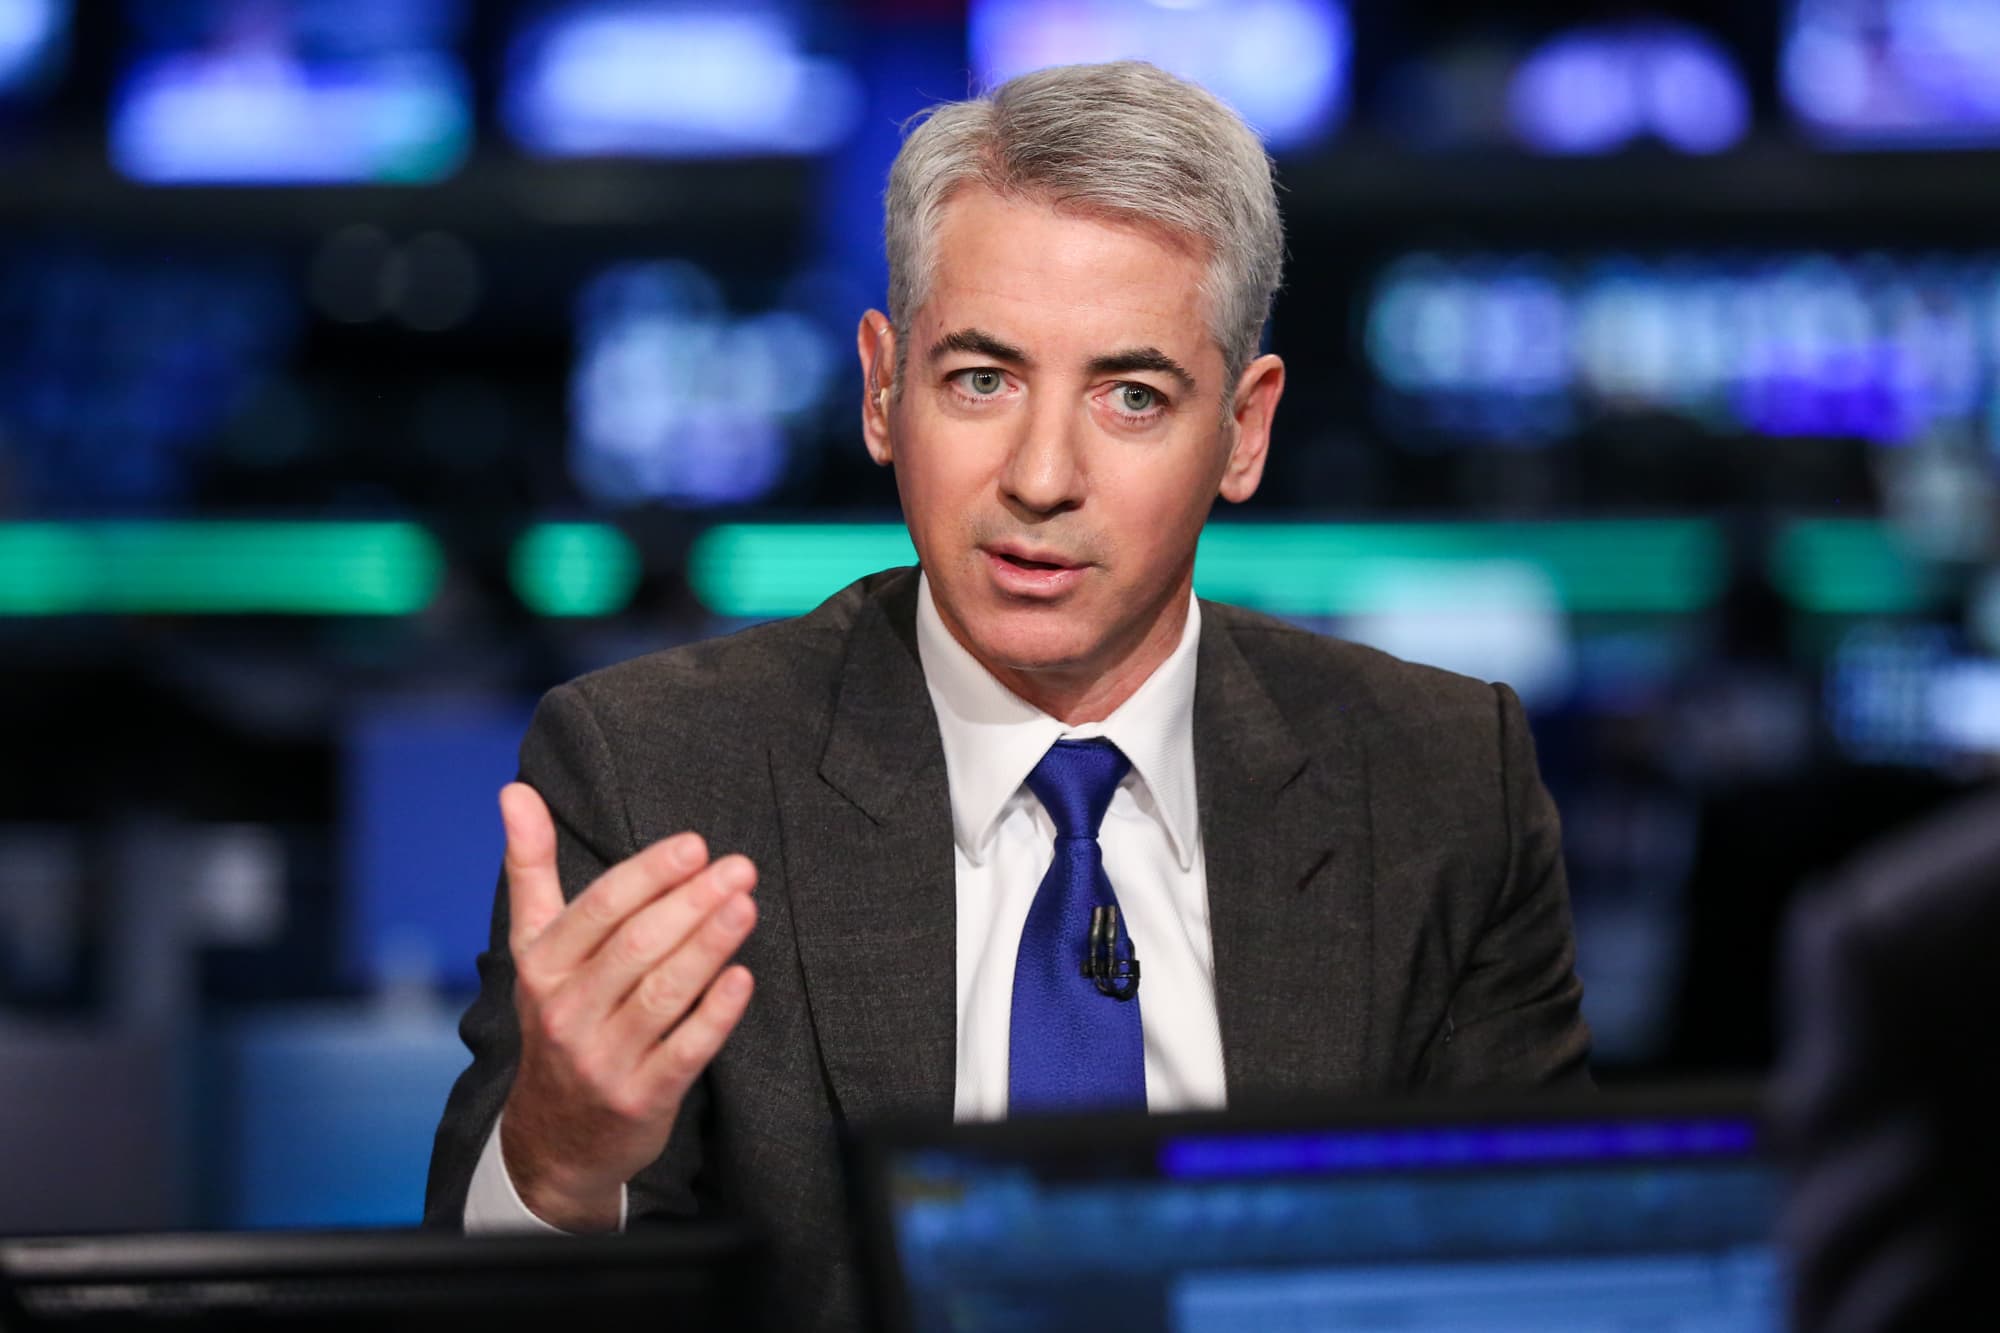 Bill Ackman says U.S. military intervention may be needed as Russia-Ukraine conflict unfolds